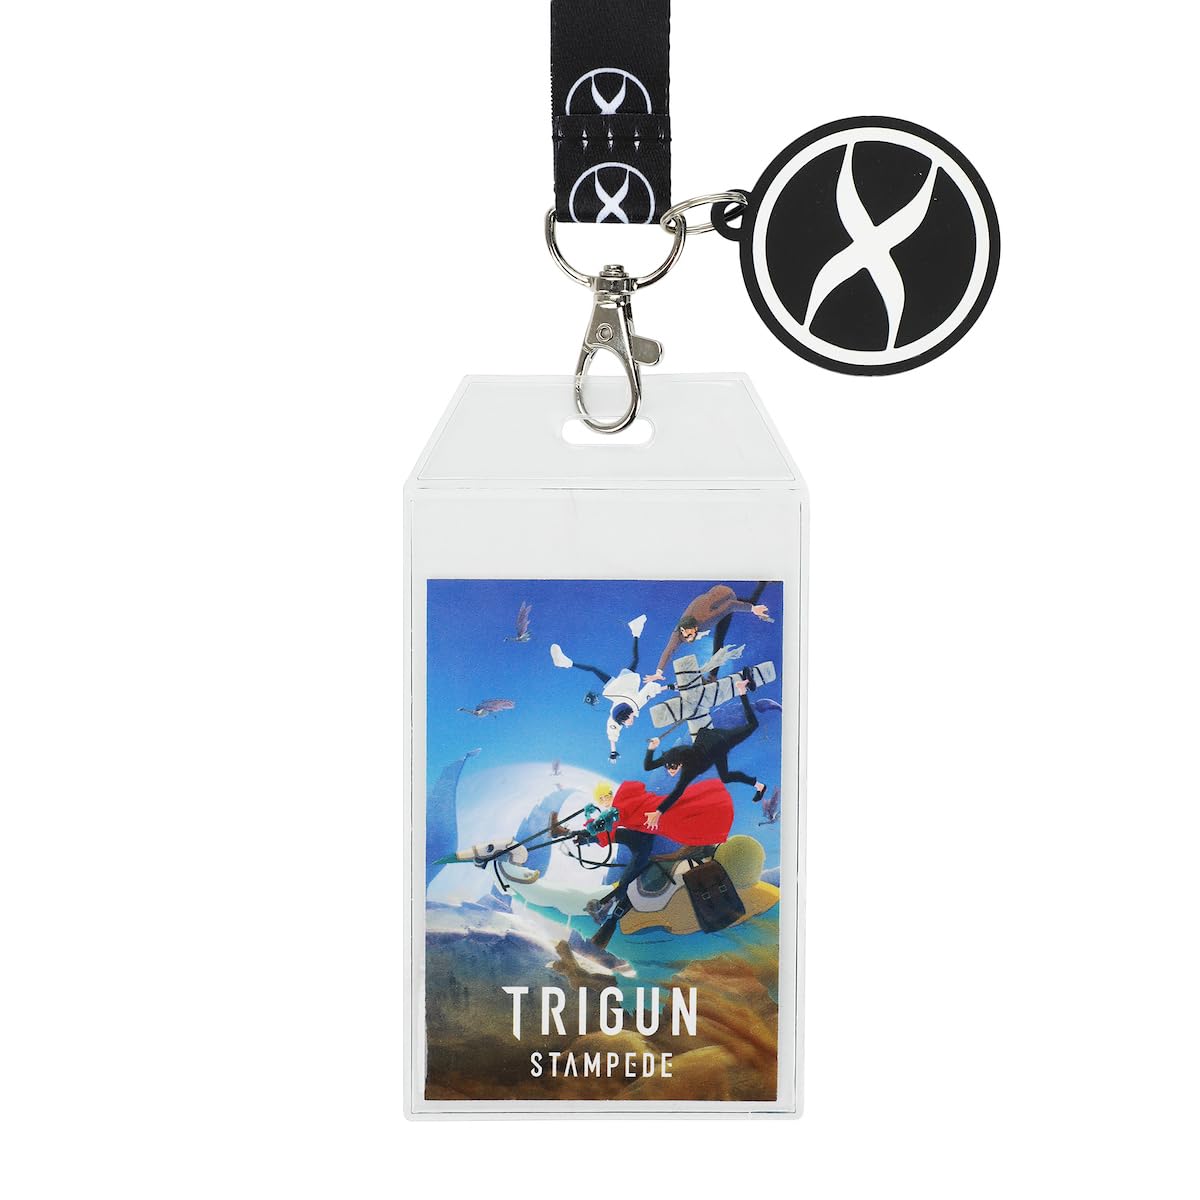 Trigun Stampede Lanyard with Collectible Charm and ID Holder